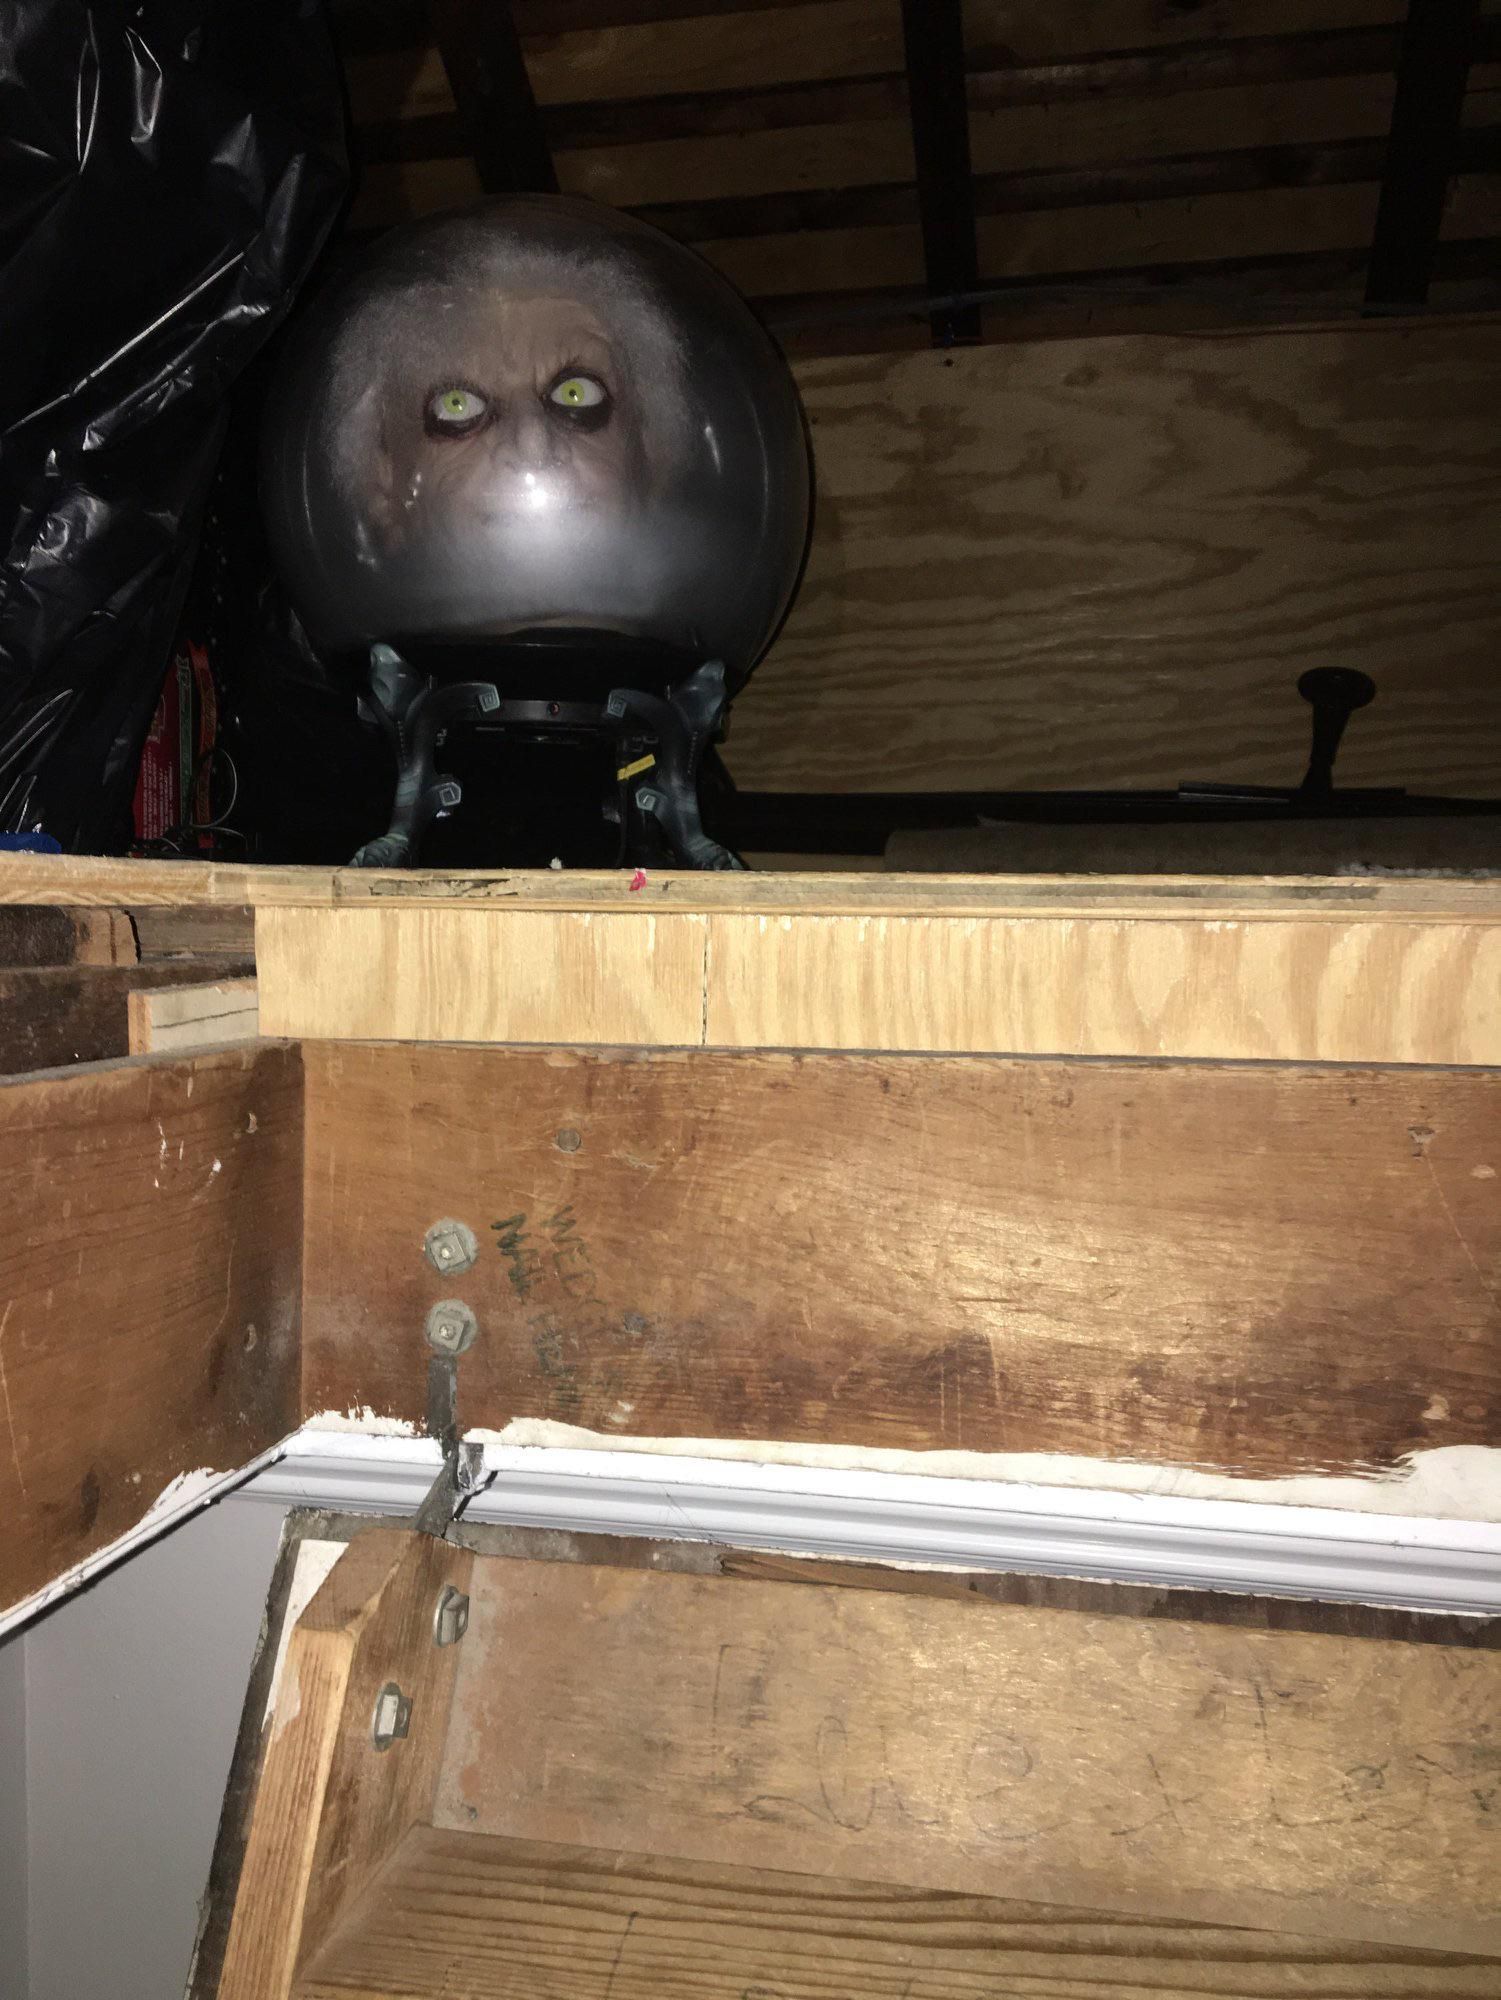 One of my HVAC technicians spotted this on his way to the attic. Almost had a heart attack.